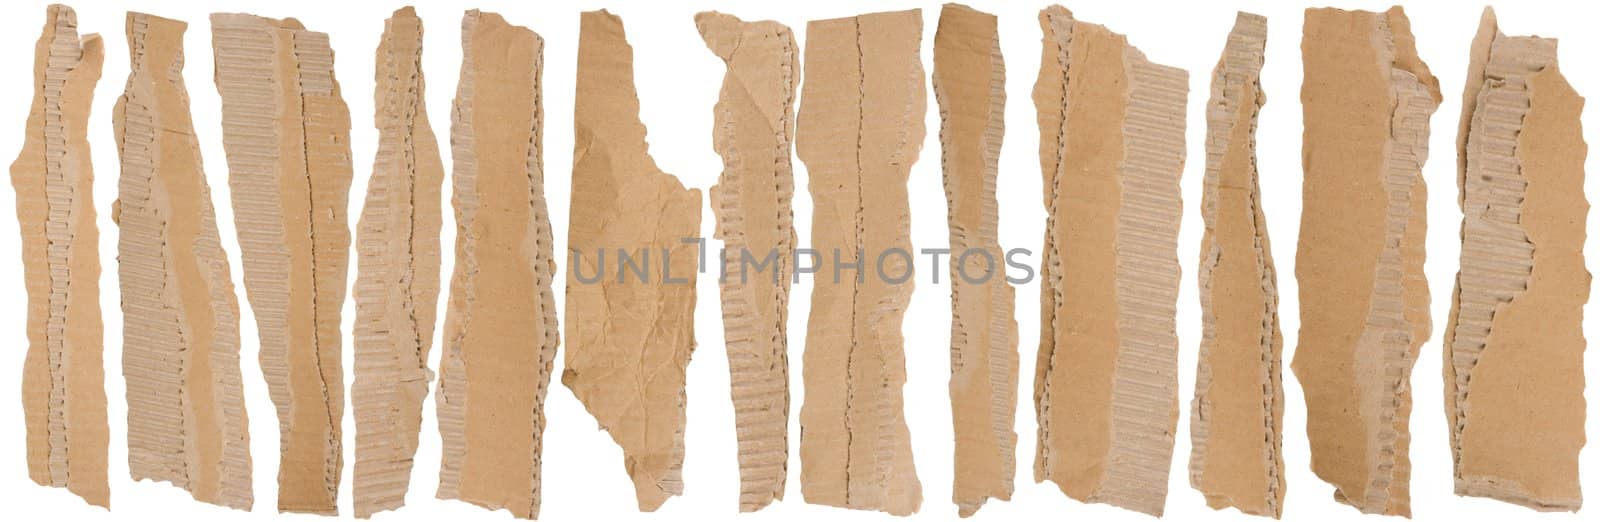 Pieces of torn brown corrugated cardboard, Isolated on White Background